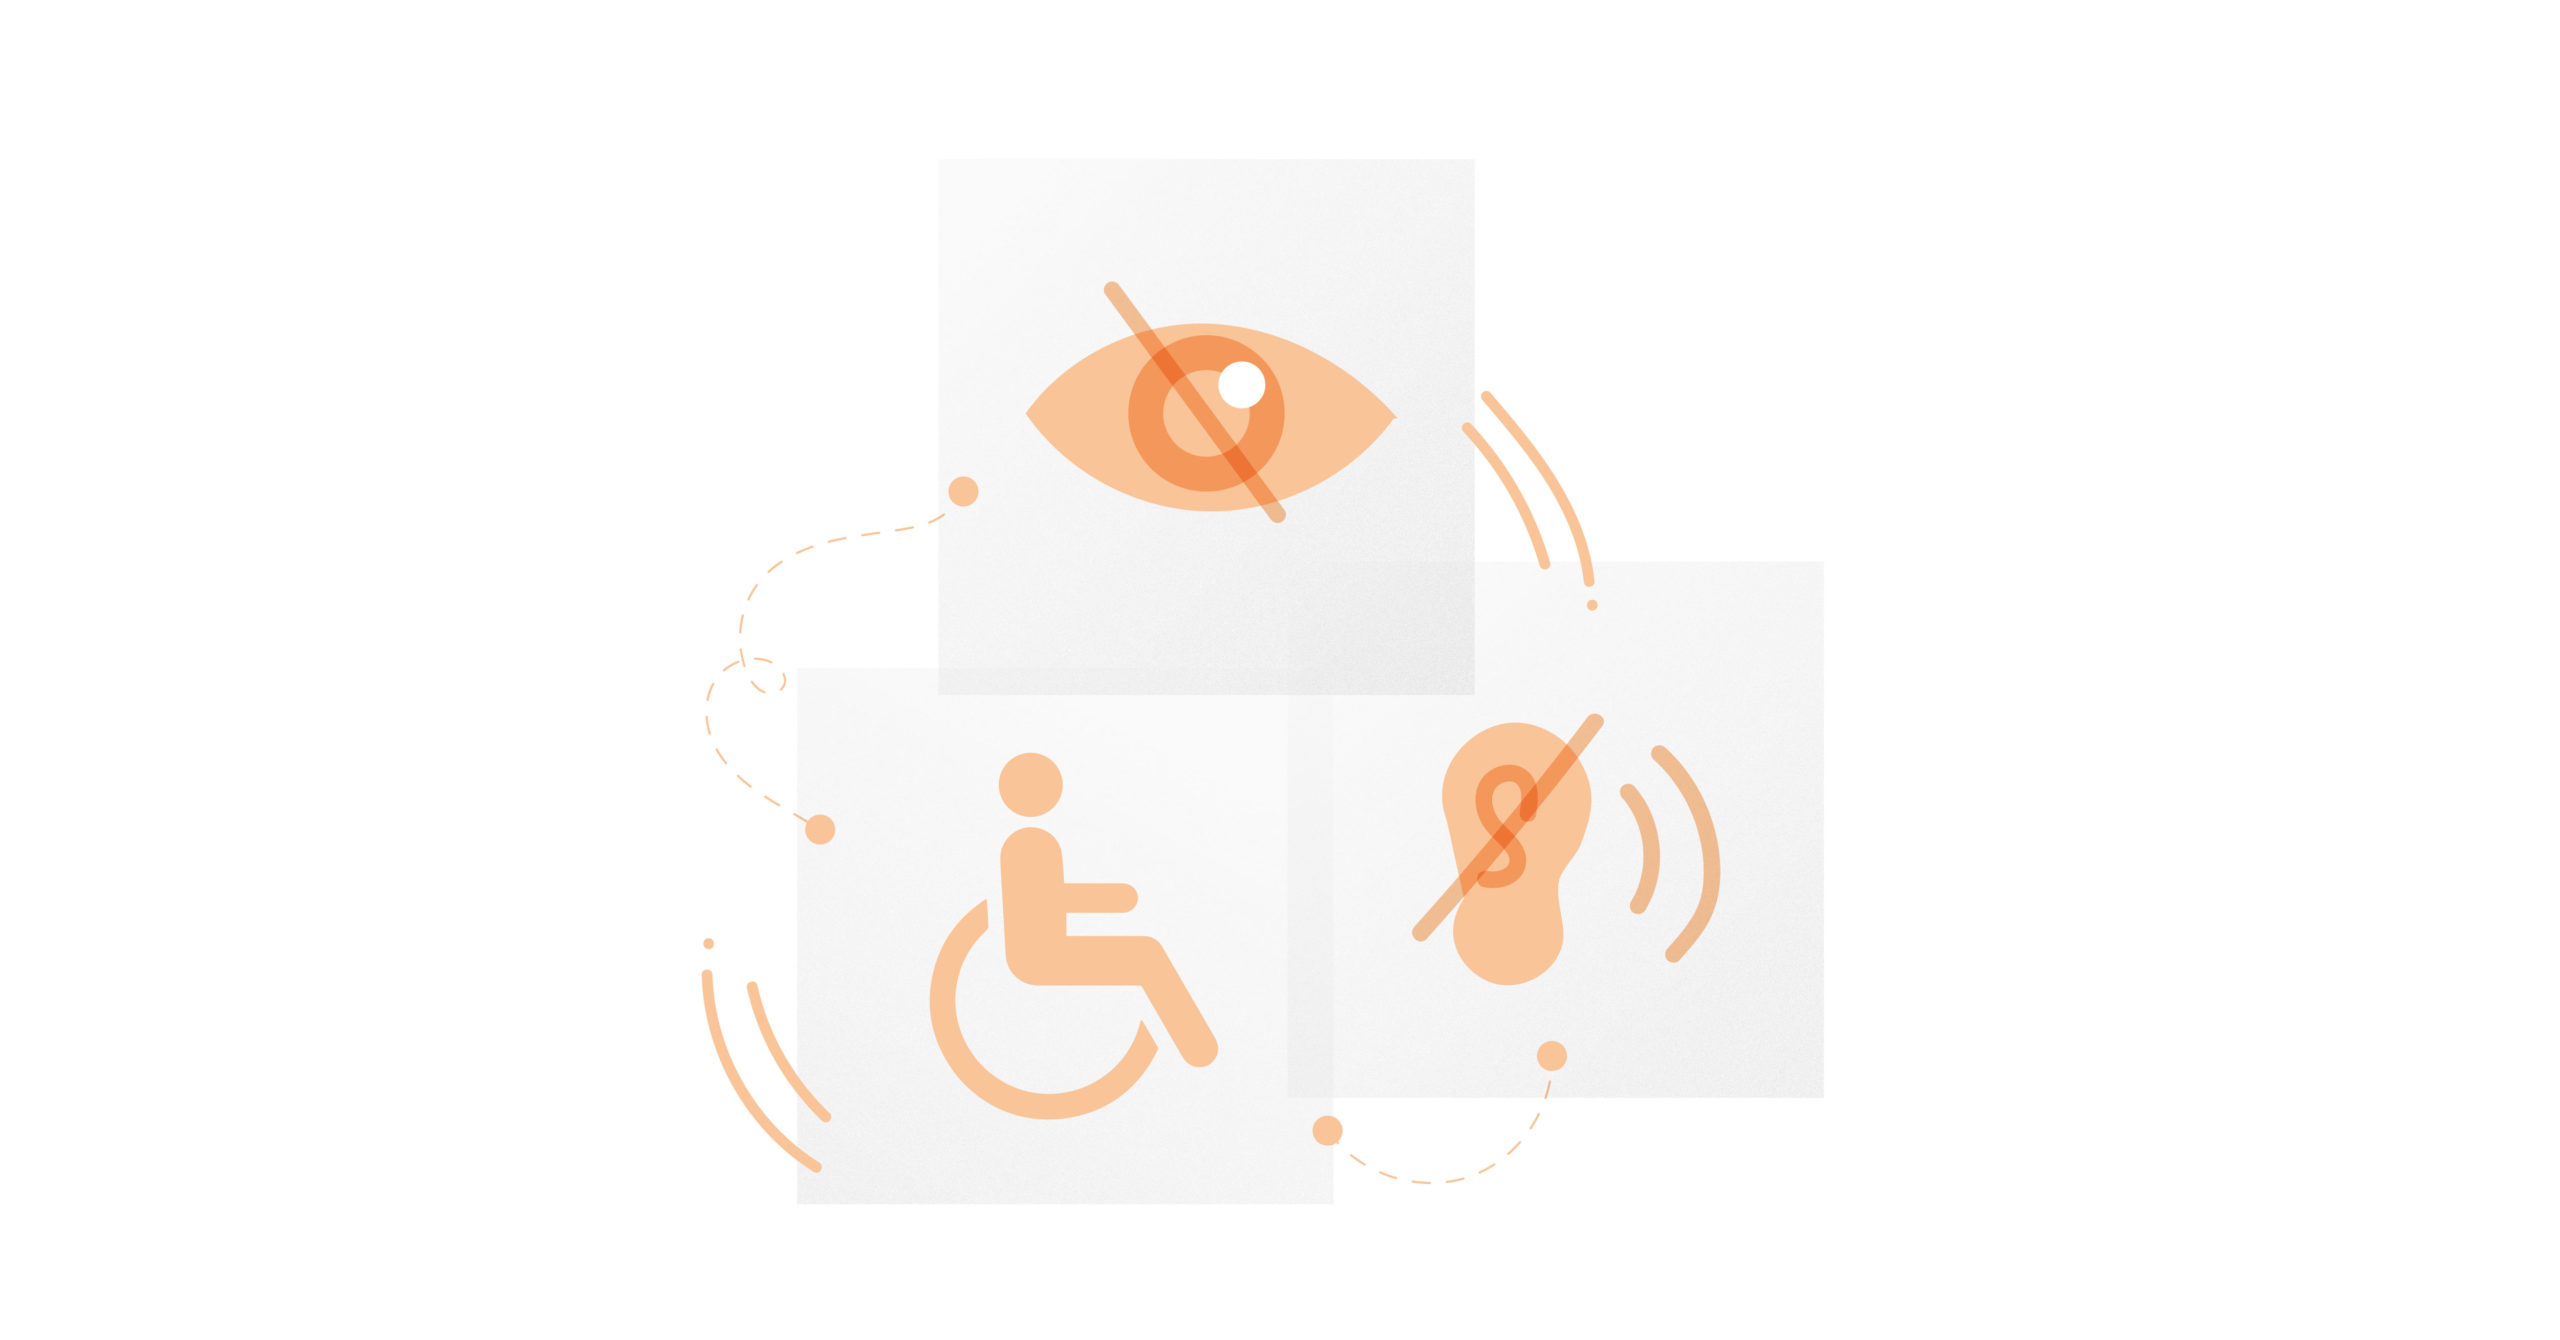 Accessibility - ui ux terms